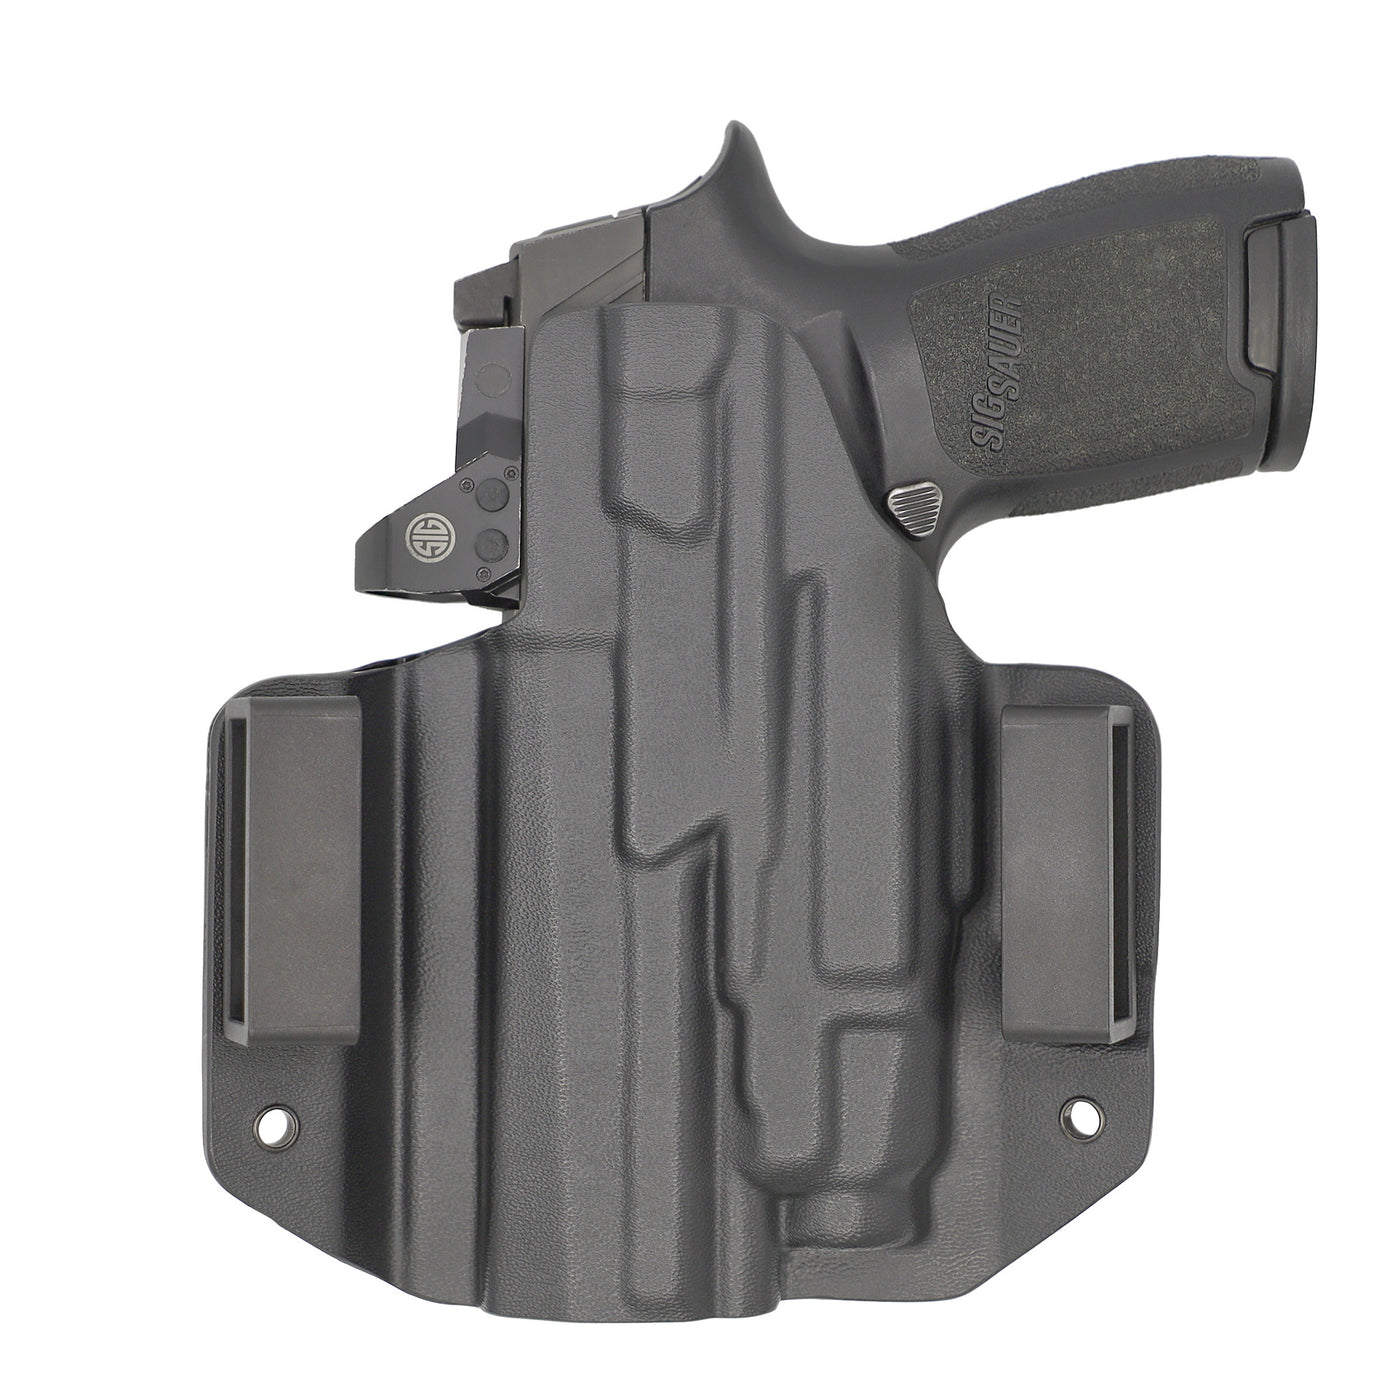 C&G Holsters custom OWB tactical XDM Elite streamlight tlr7/a in holstered position back view